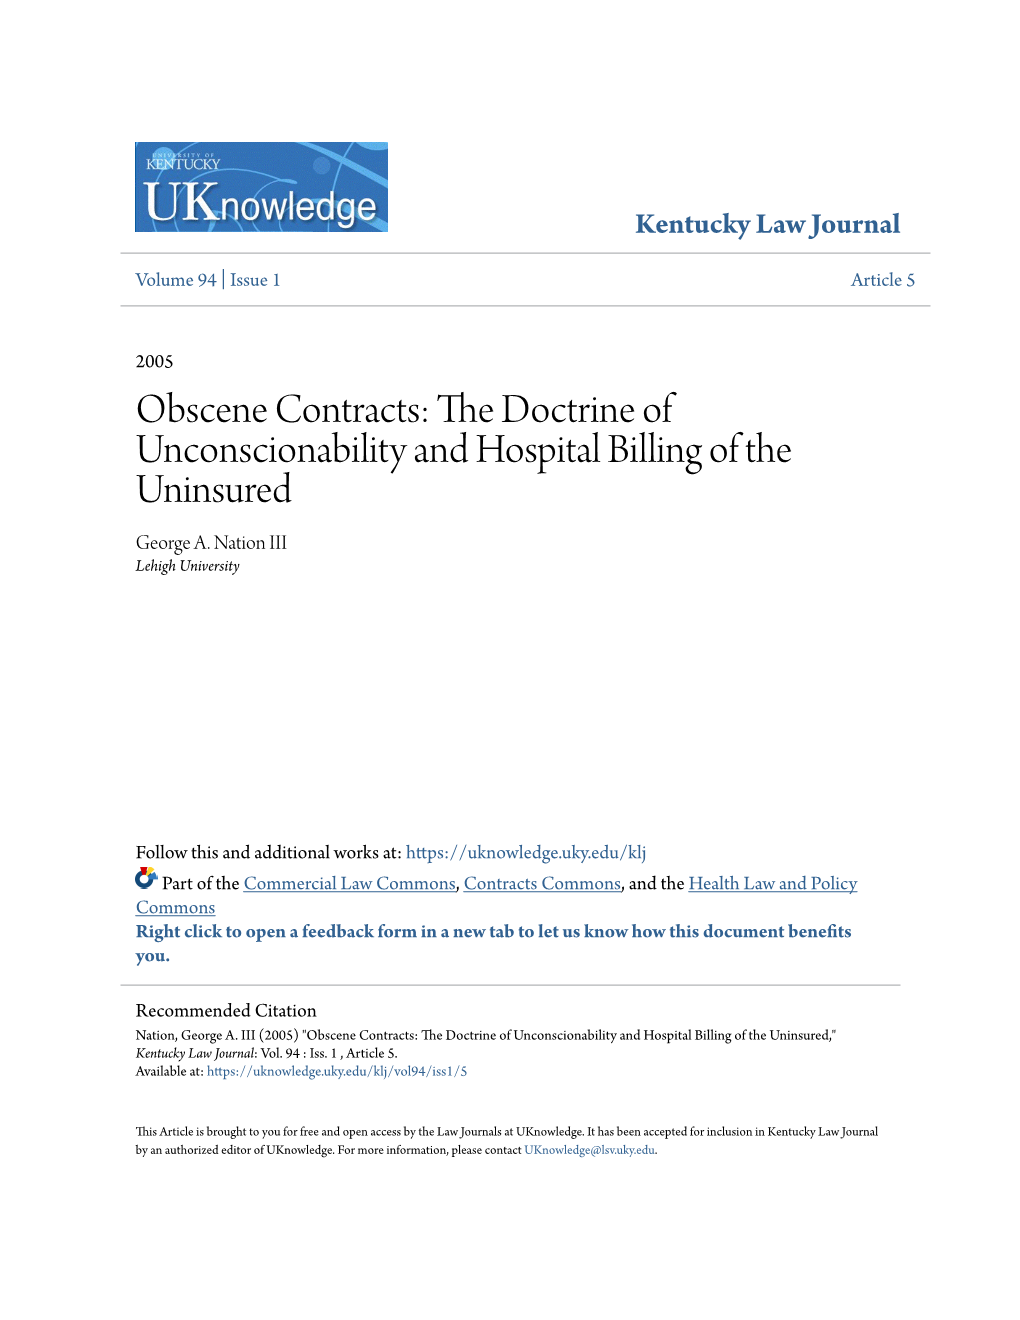 The Doctrine of Unconscionability and Hospital Billing of the Uninsured